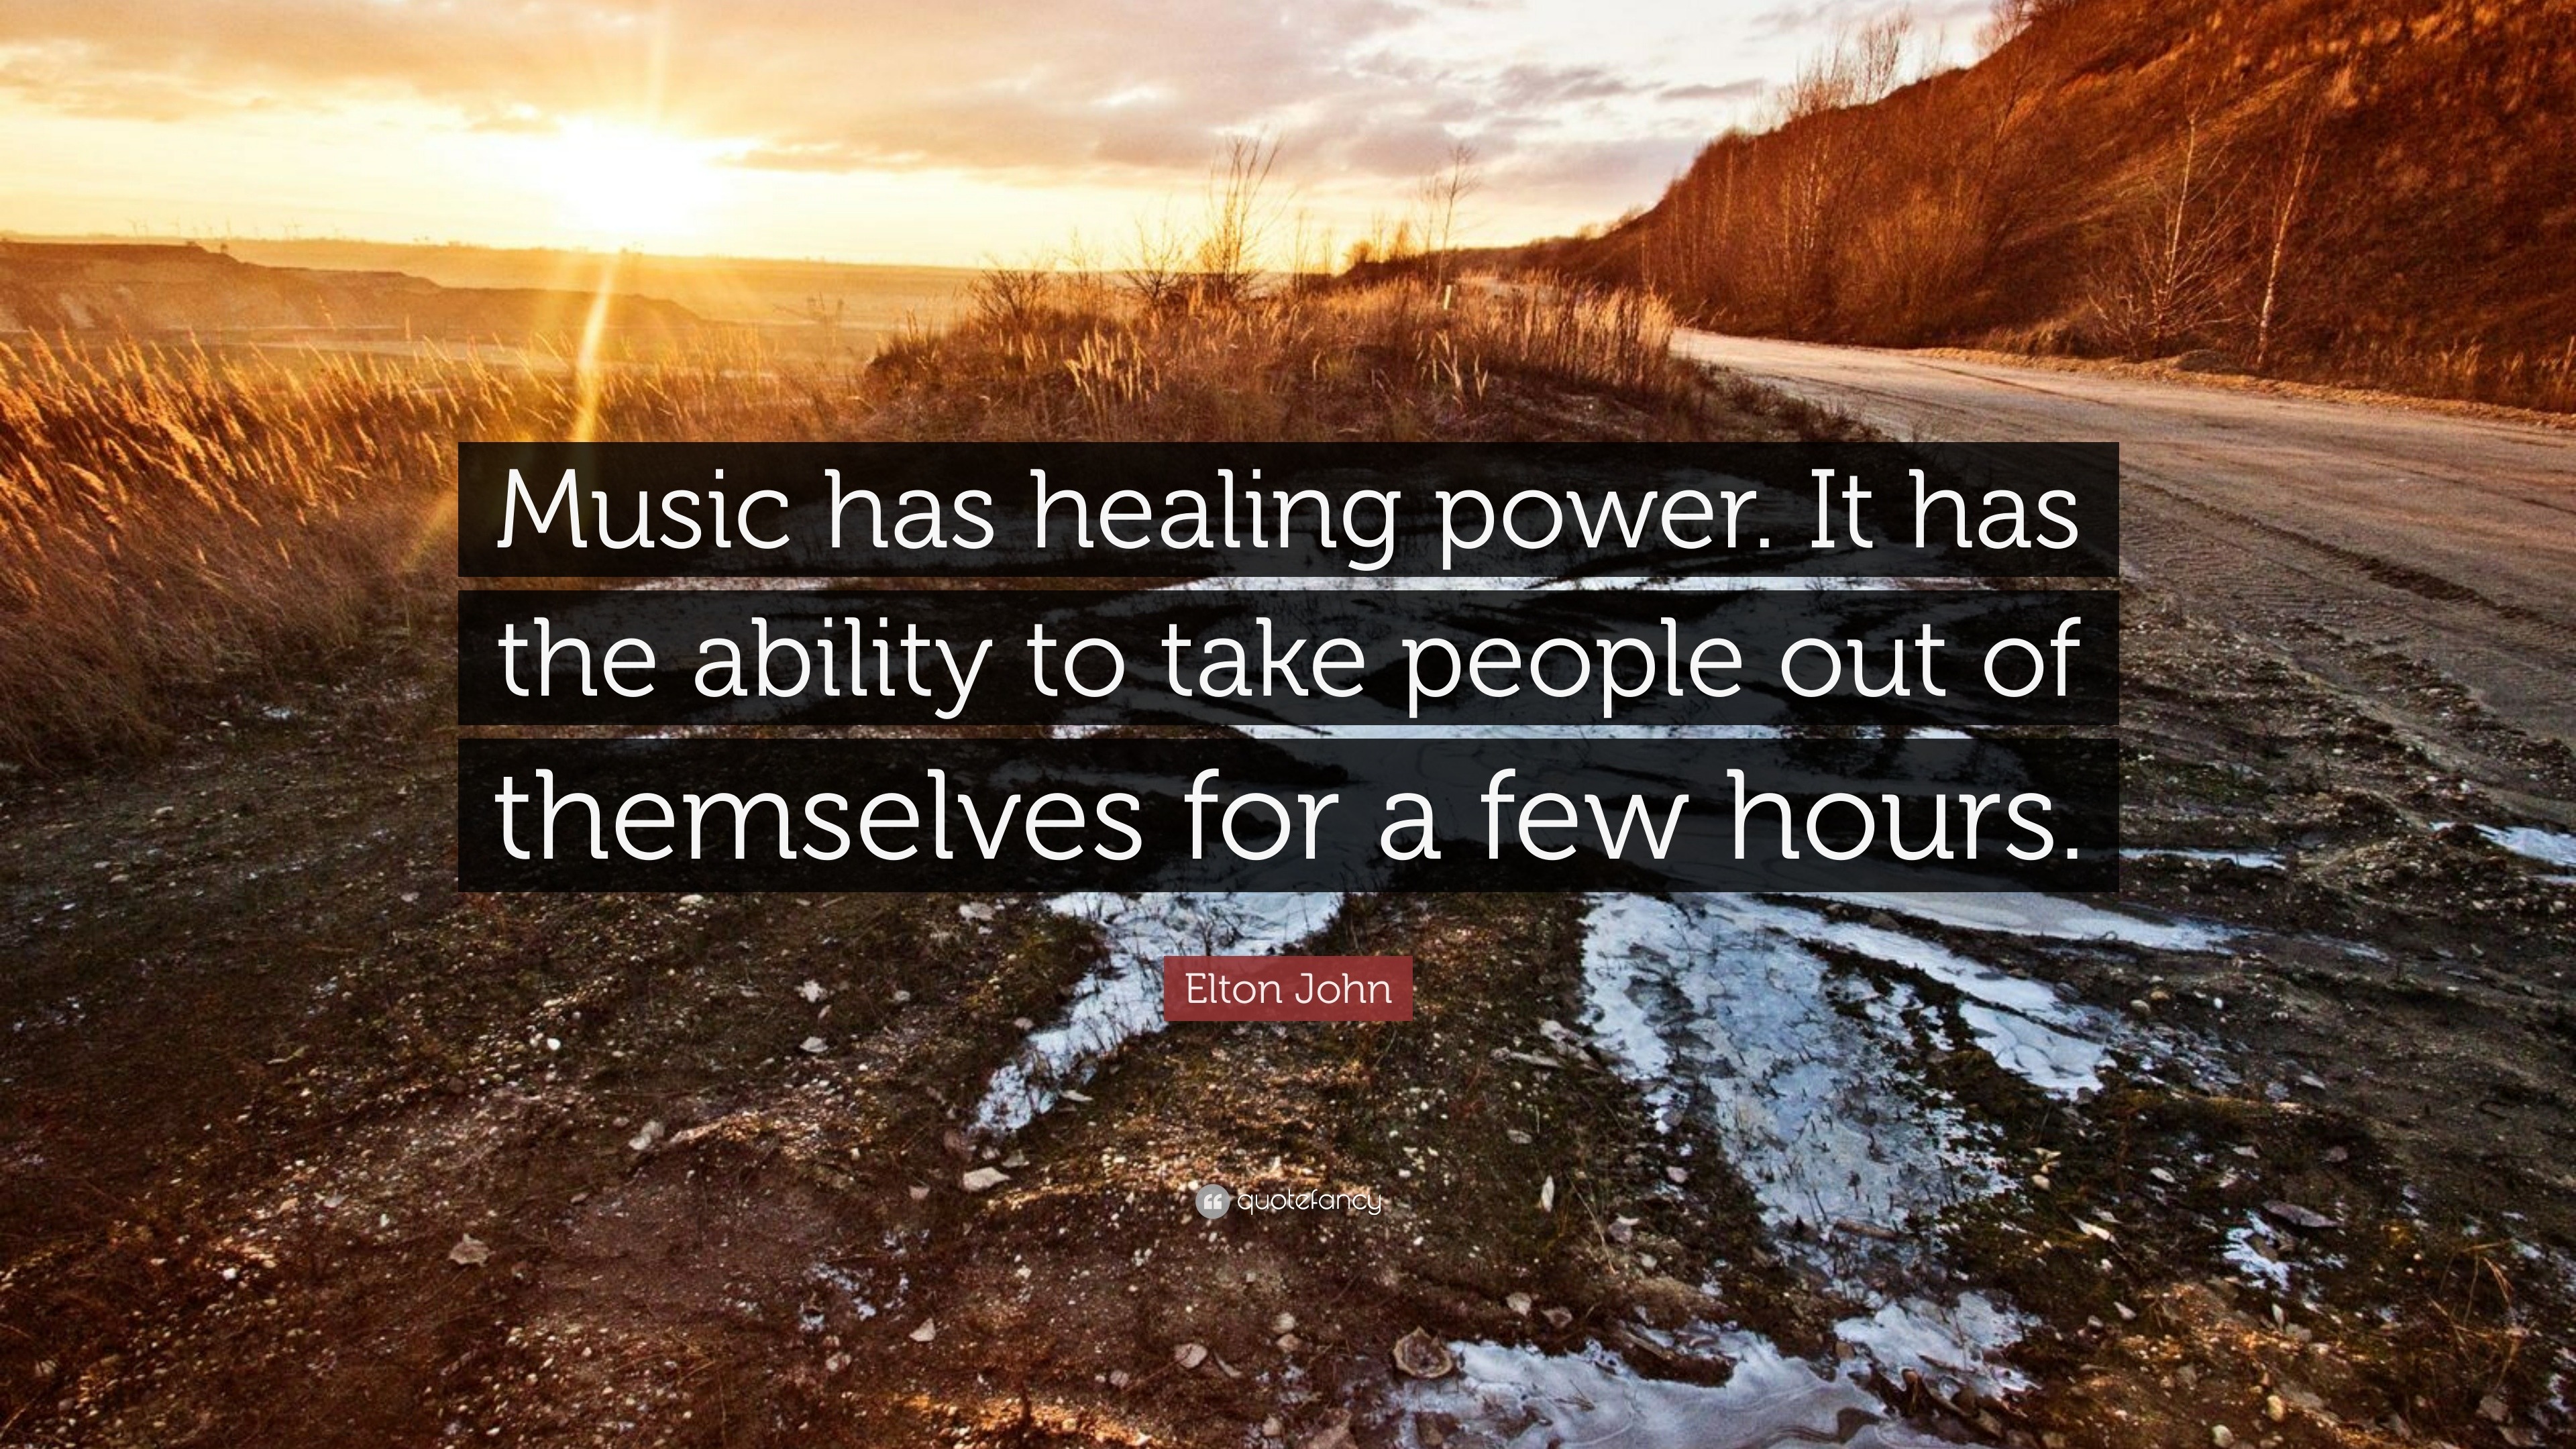 a speech on music has the power to heal